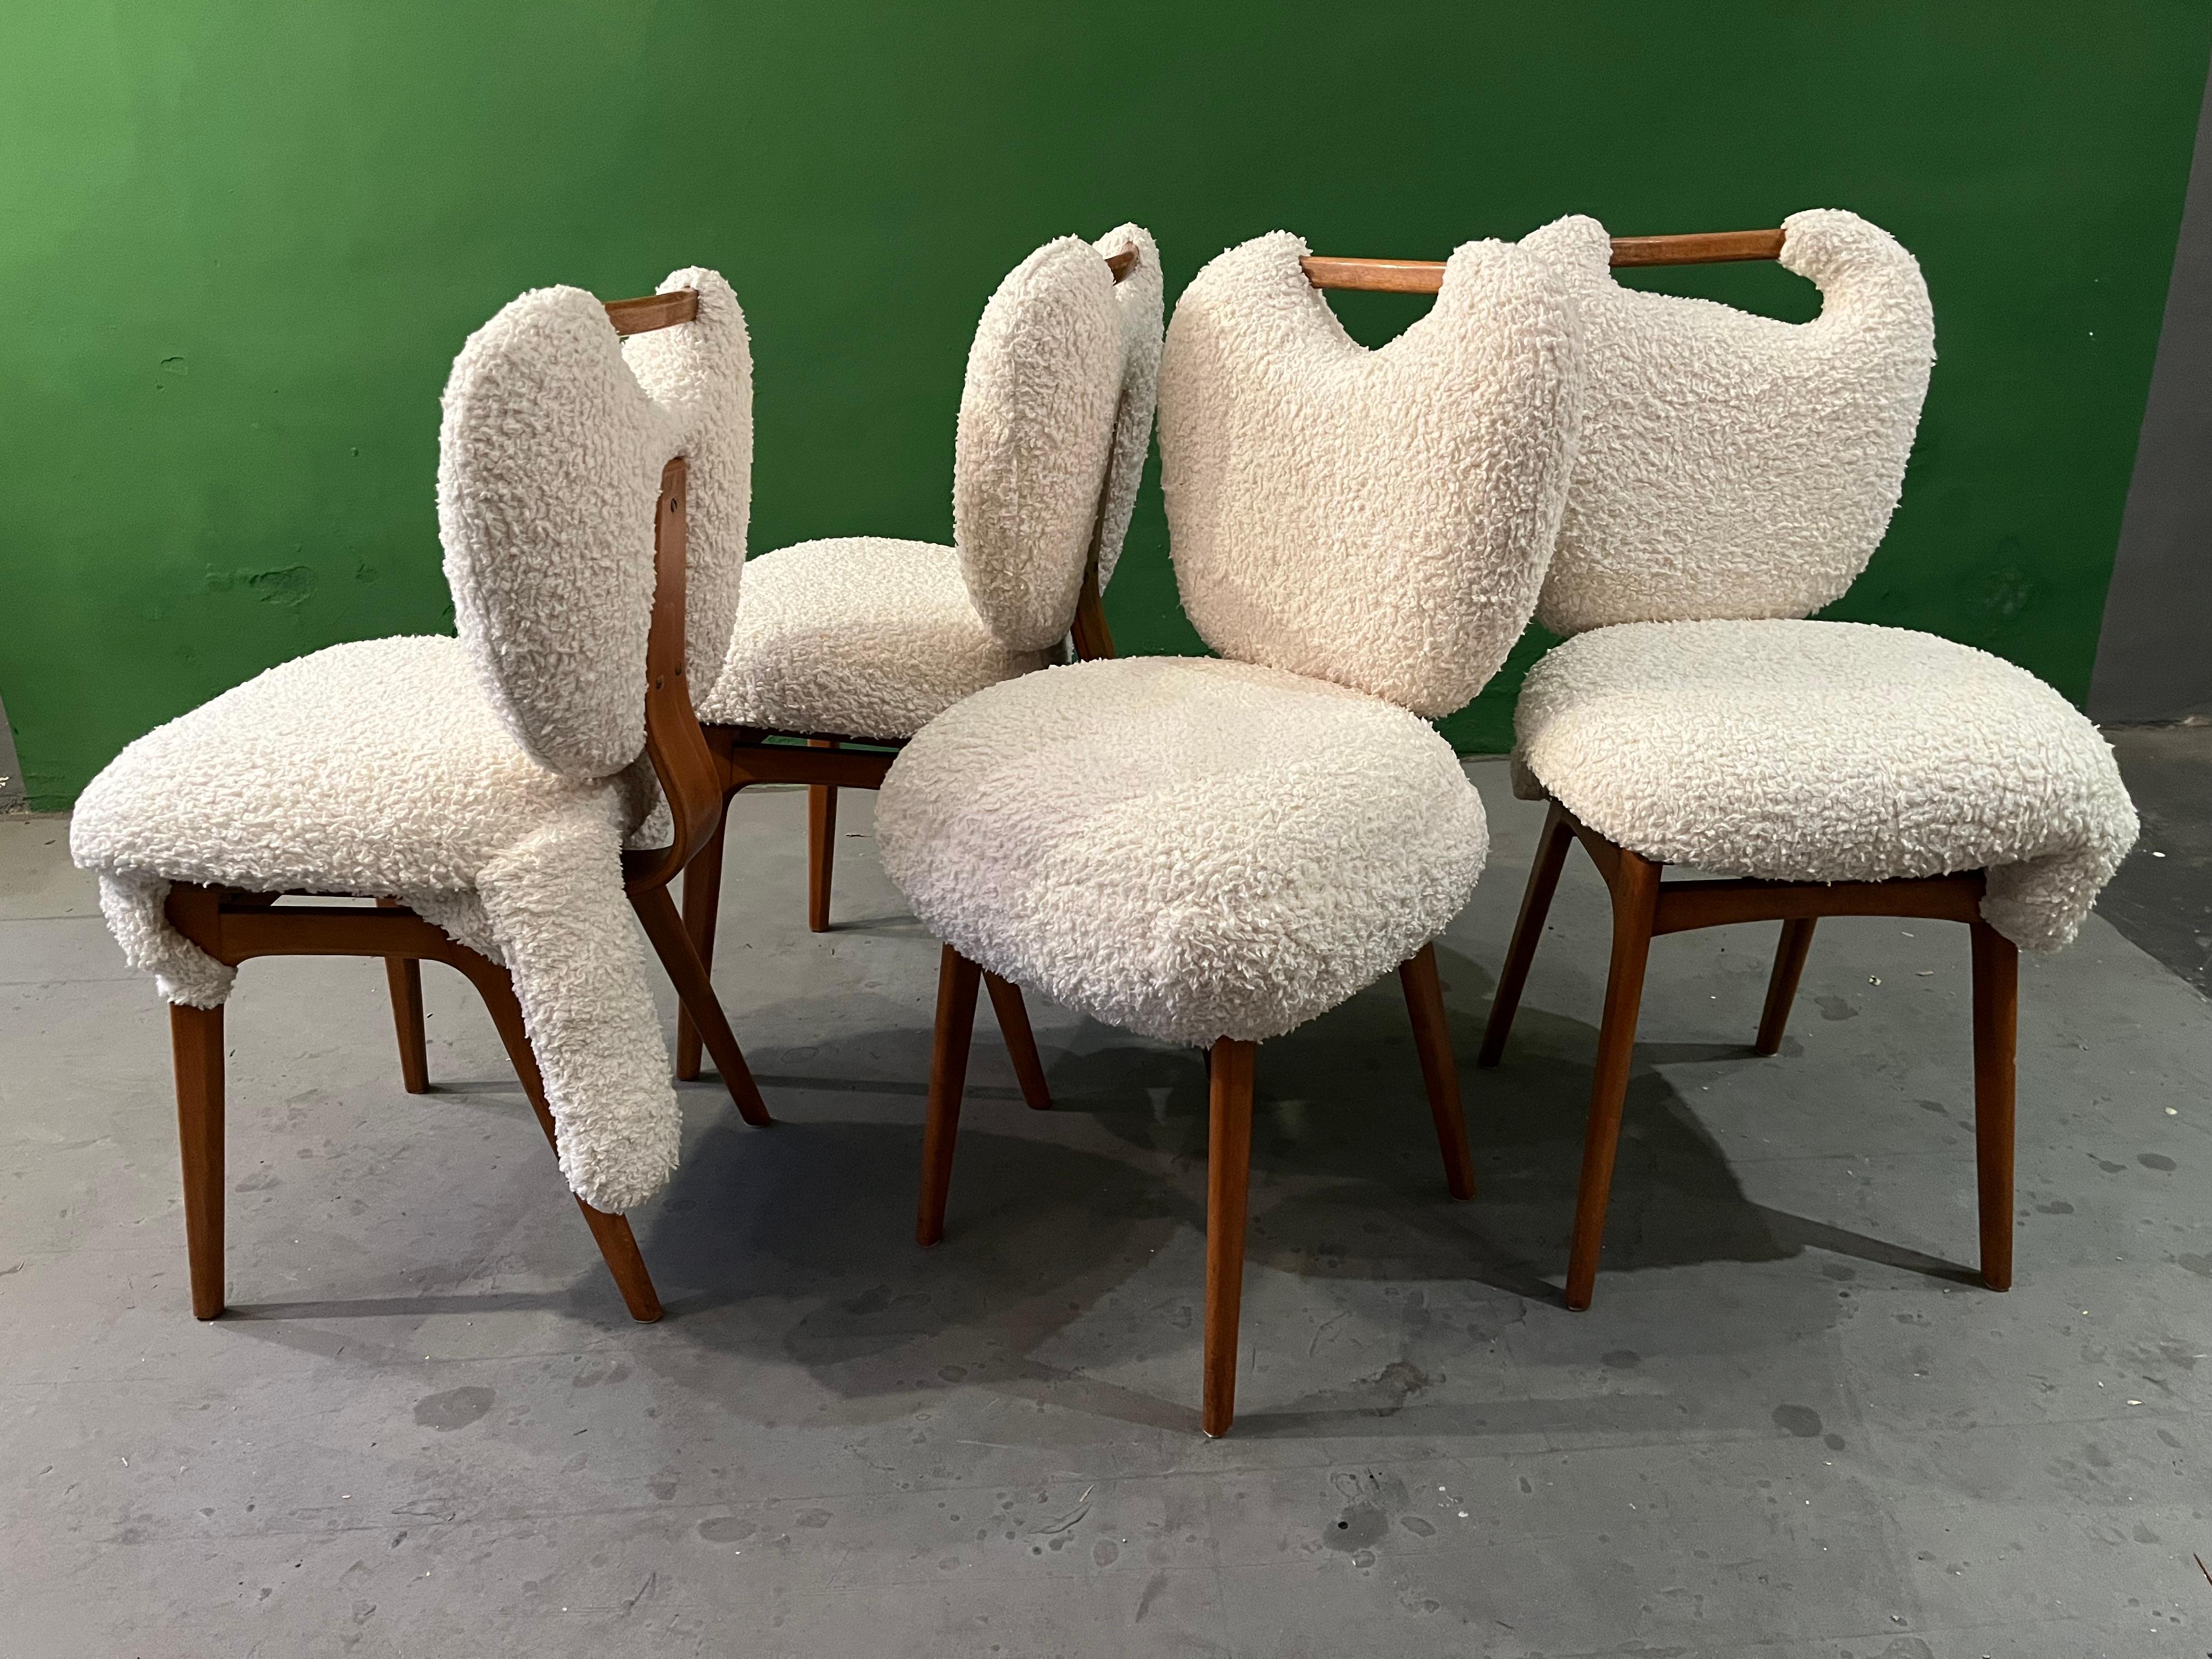 Lamb Teddy Chairs by Markus Friedrich Staab For Sale 11